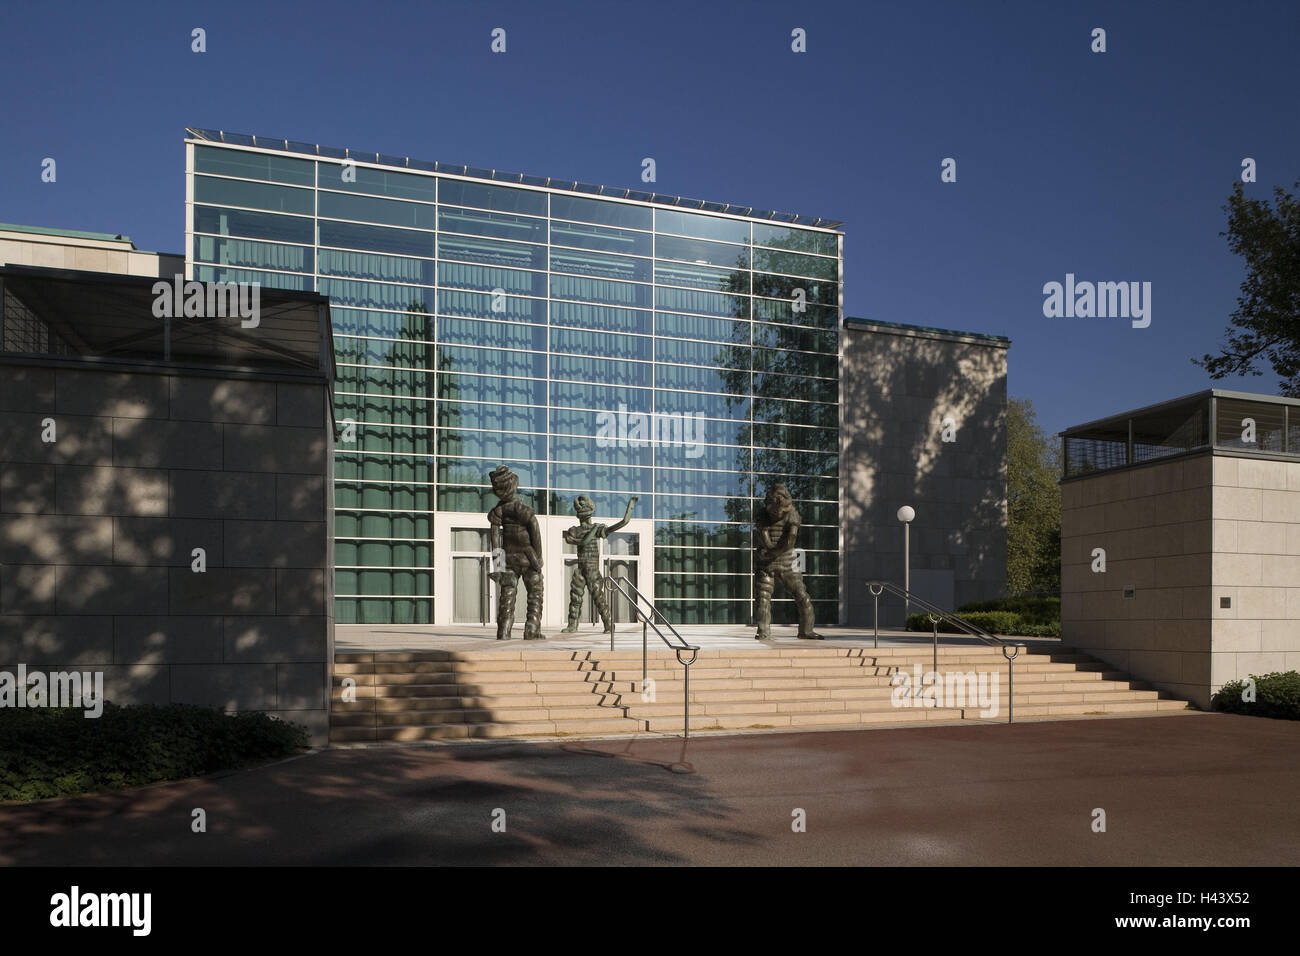 Germany, North Rhine-Westphalia, food, art, sculptures, 'Completely big minds', from Thomas Schütte, town, building, theatre, philharmonic concert hall, modern, outside, art, figures, facade, architecture, glass front, Stock Photo